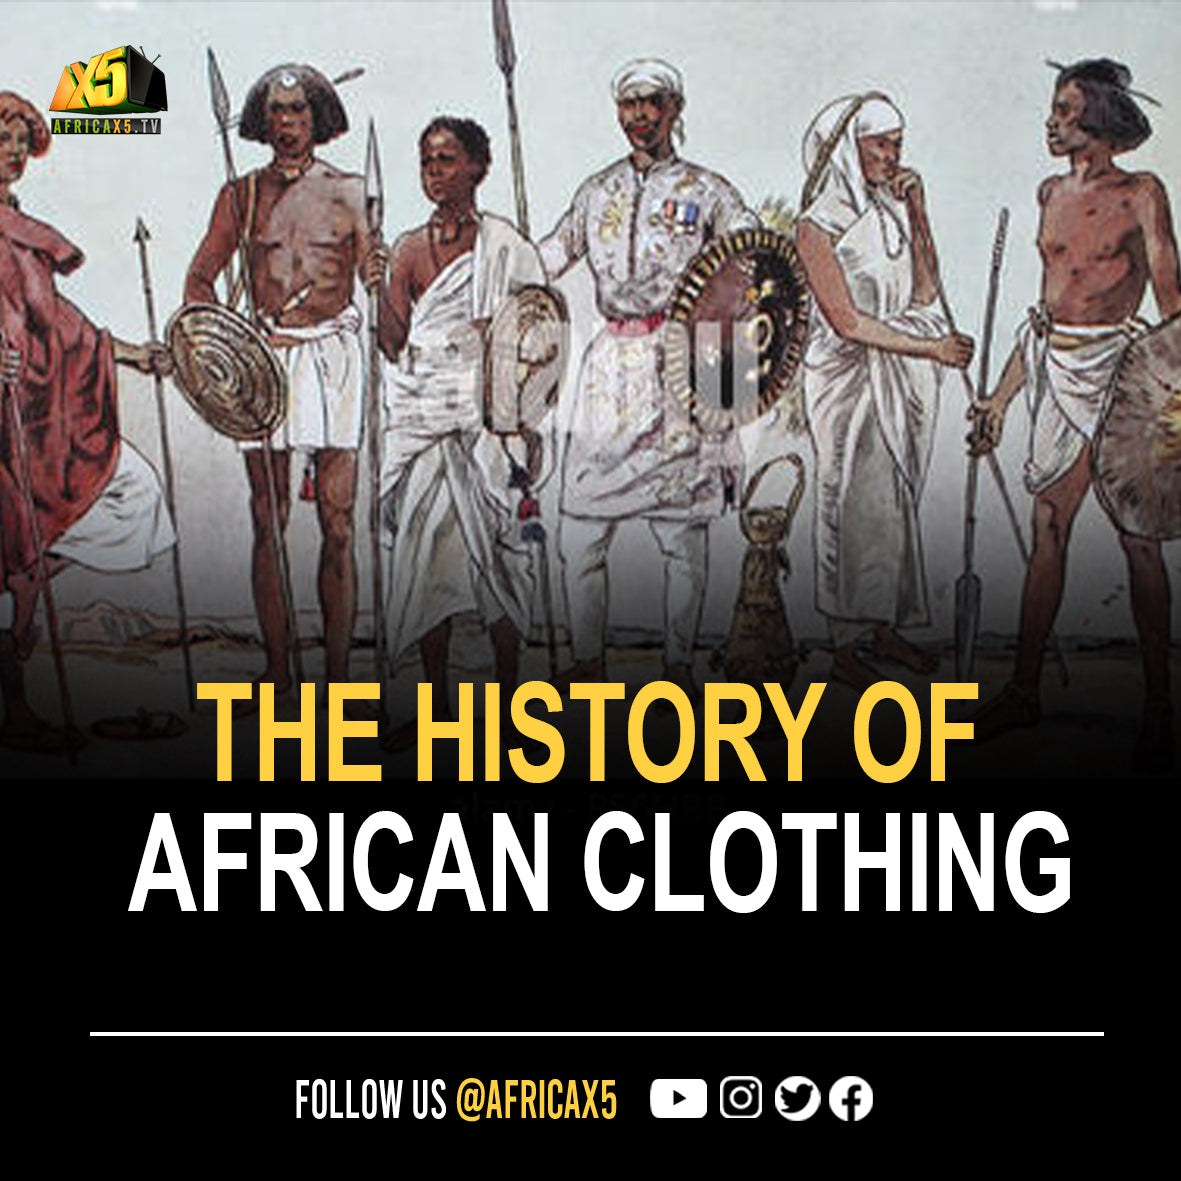 HISTORY OF AFRICAN CLOTHING